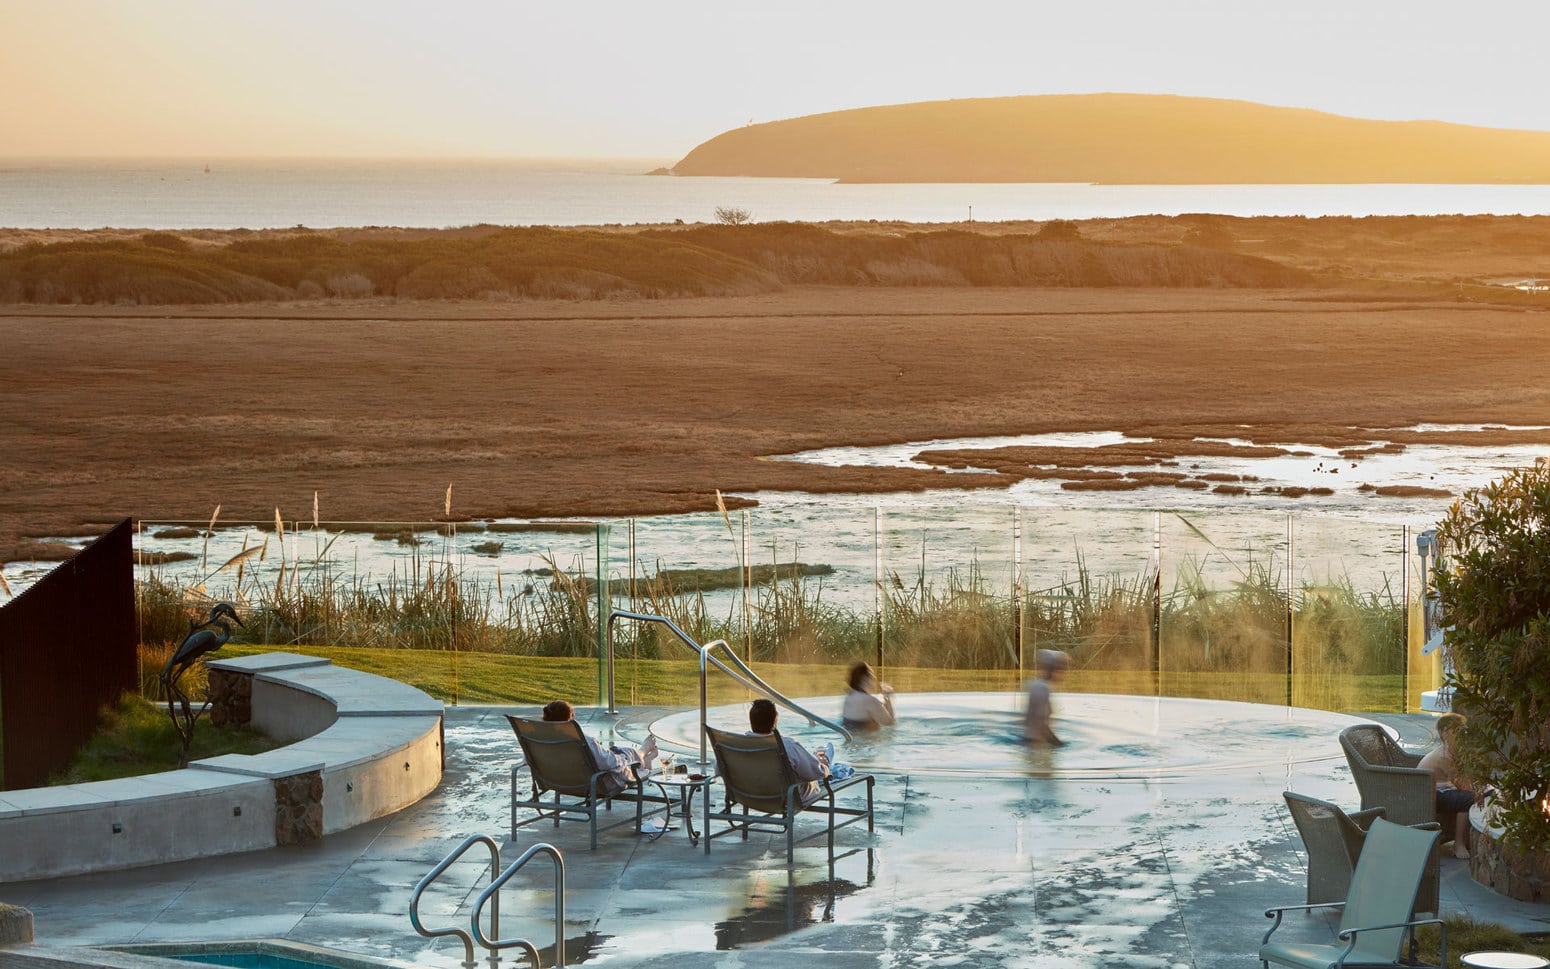 People enjoying the spa area with the view of the saltmarsh and ocean